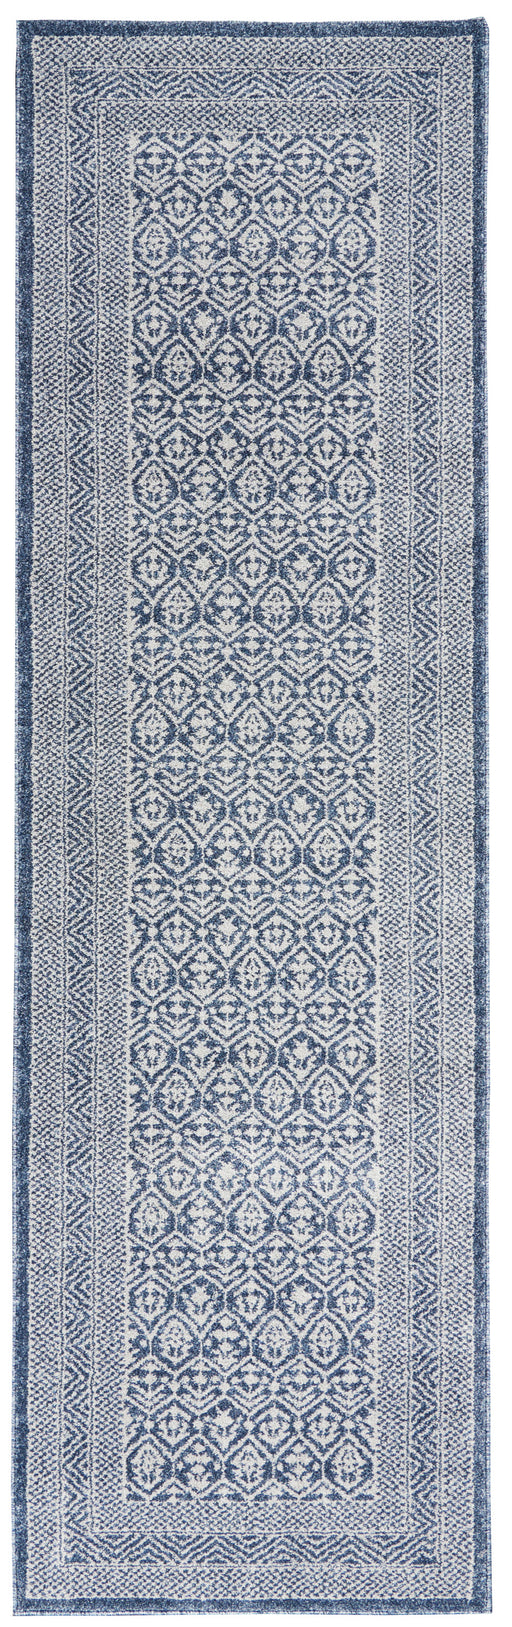 Nourison Palermo 8' Runner Blue and Grey Distressed Bohemian Area Rug